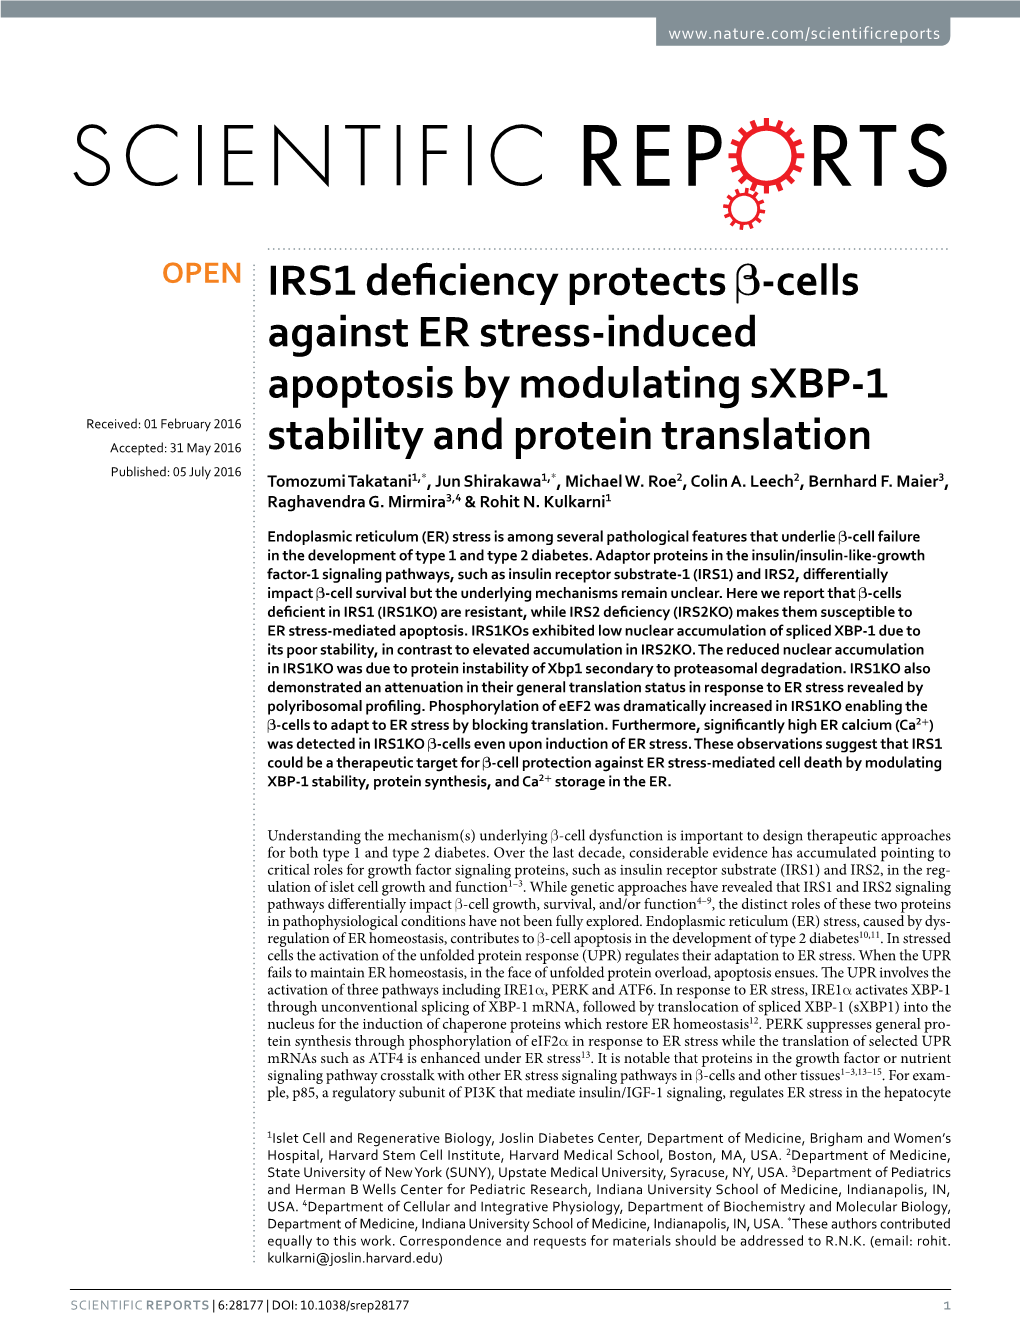 IRS1 Deficiency Protects Β-Cells Against ER Stress-Induced Apoptosis by Modulating Sxbp-1 Stability and Protein Translation